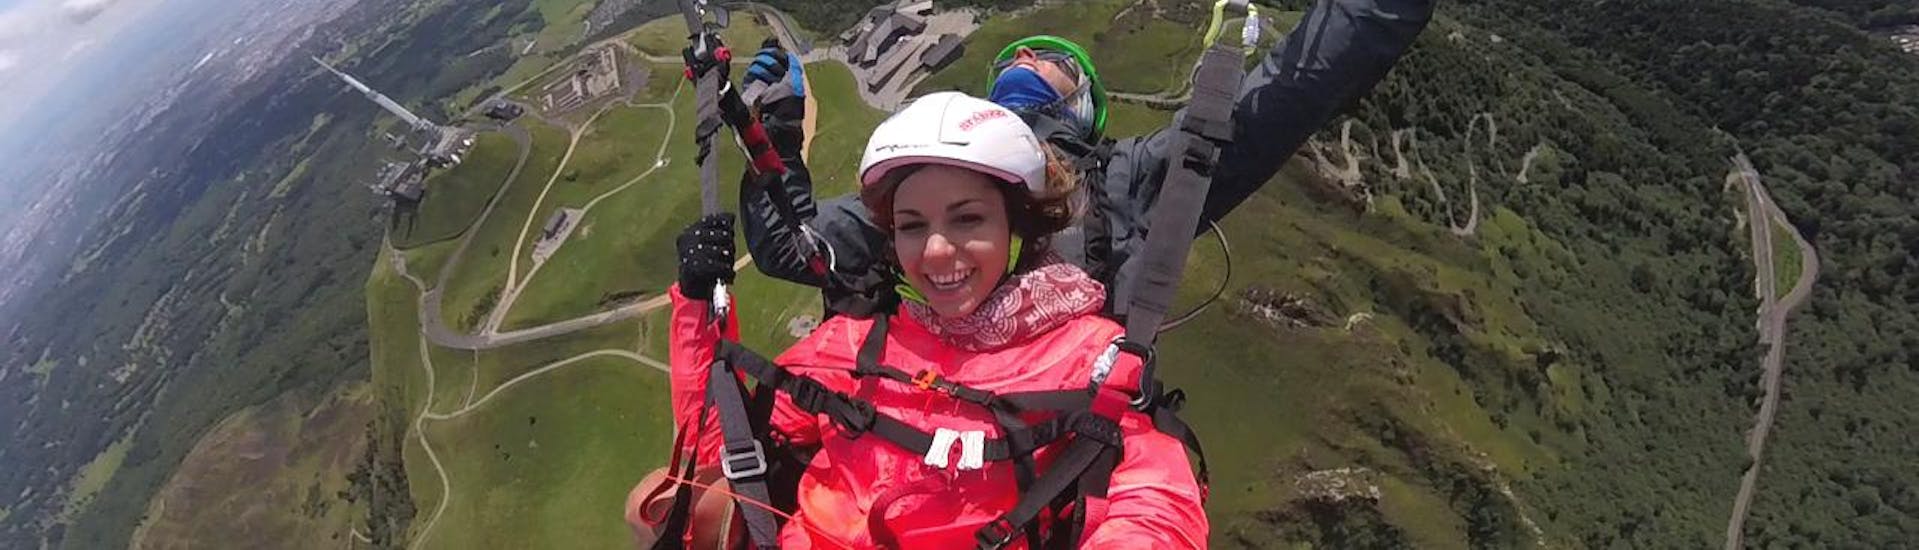 During the Tandem Paragliding "Sensations" - Puy de Dôme, an experienced paragliding pilot from Absolu Parapente is flying a woman who is thrilled with the spectacular views under her feet.